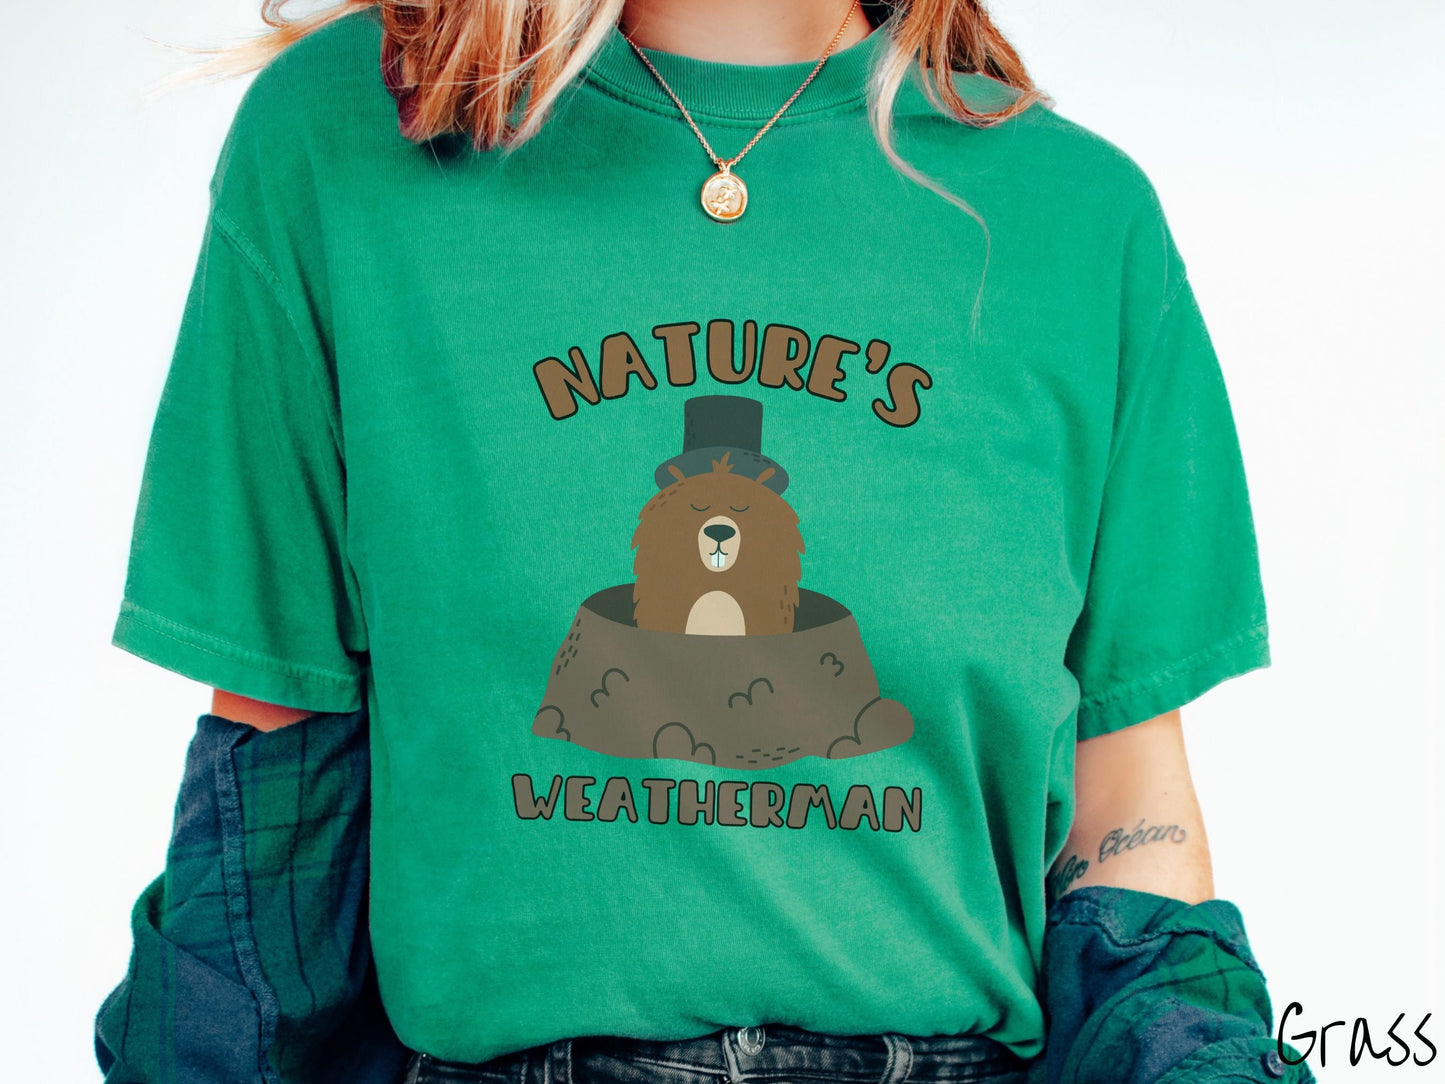 A woman wearing a cute grass colored shirt with the text Natures Weatherman sandwiching Phil the Punxsutawney PA groundhog who is wearing a black top hat and is coming out of his hole for Groundhogs Day.